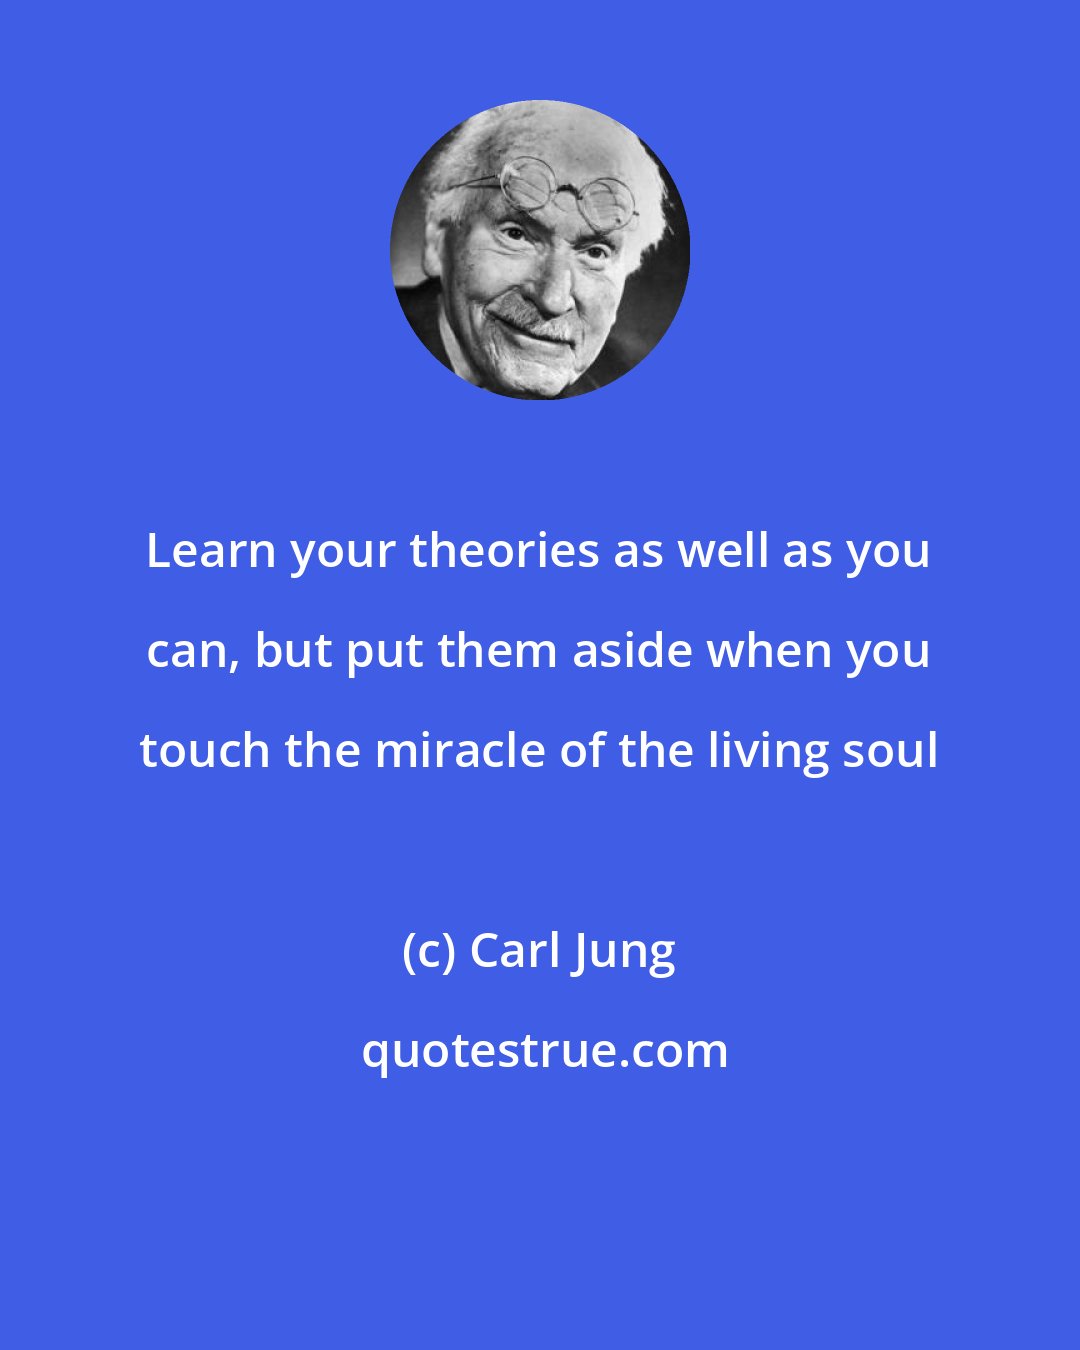 Carl Jung: Learn your theories as well as you can, but put them aside when you touch the miracle of the living soul